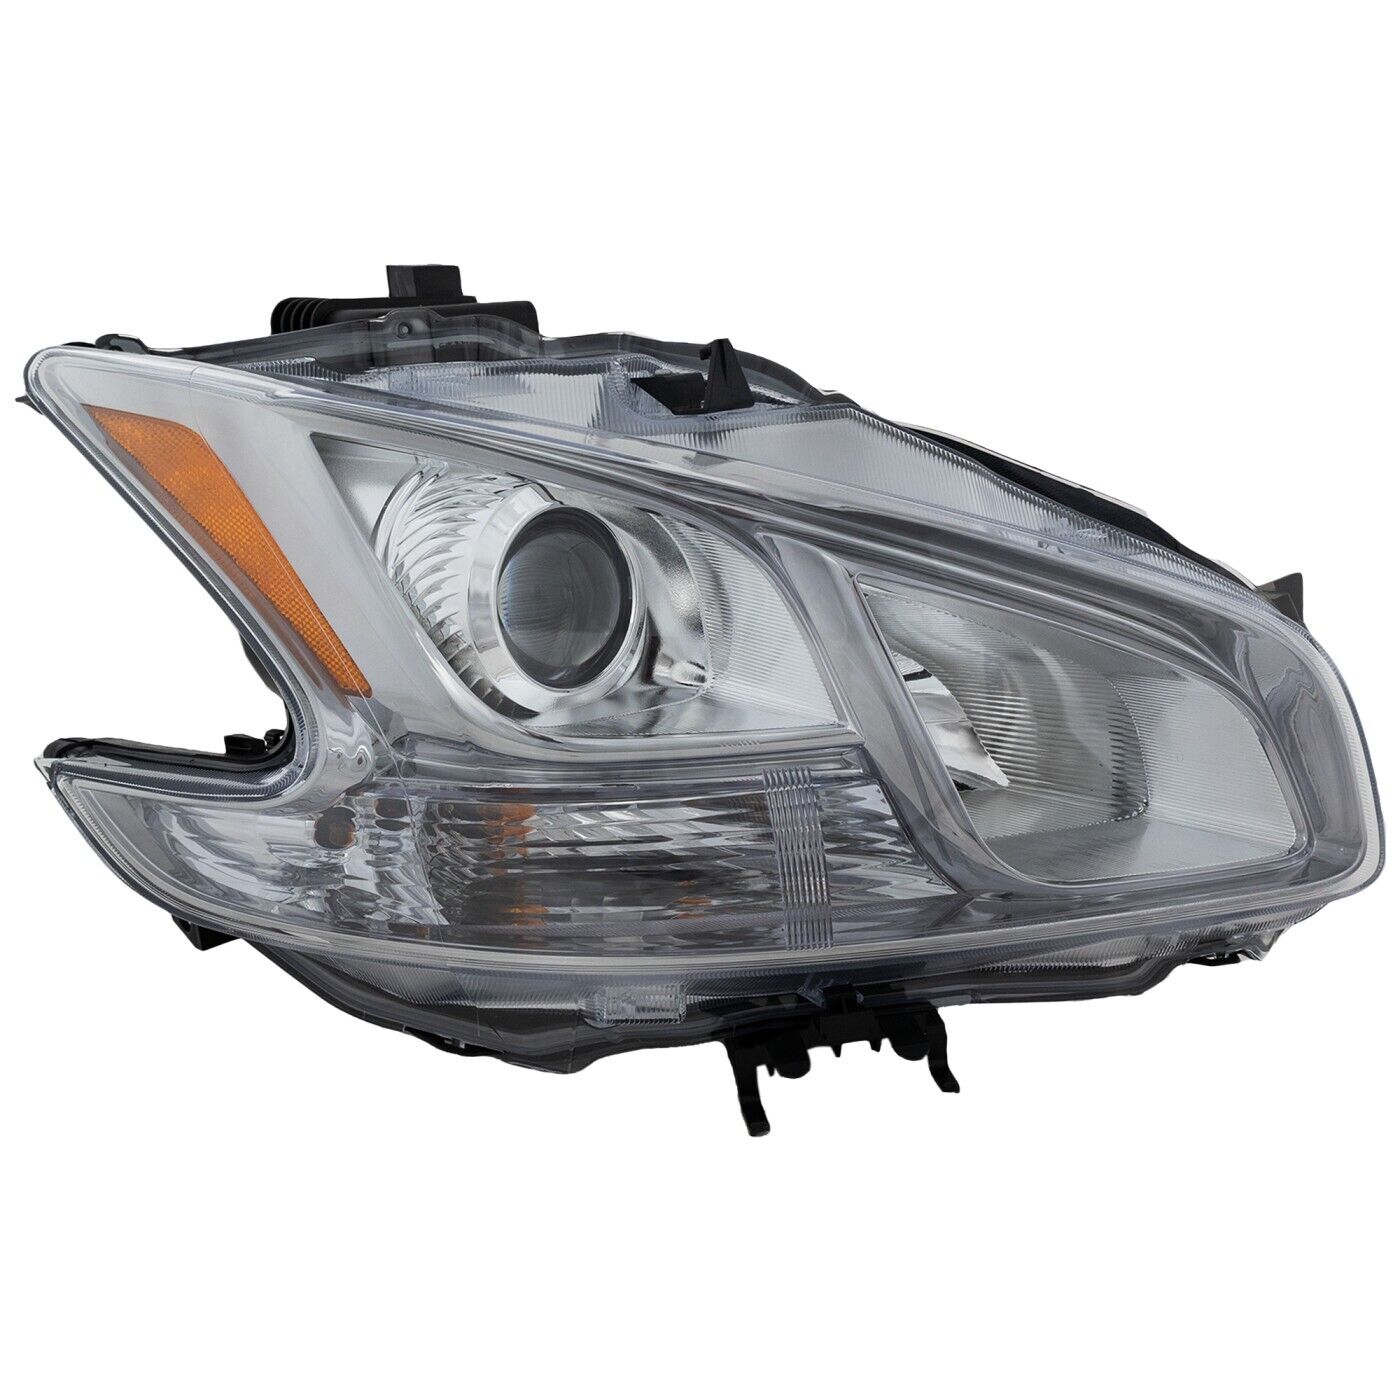 HID Headlight Assembly with Clear Lens Passenger Side For 2009-14 Nissan Maxima